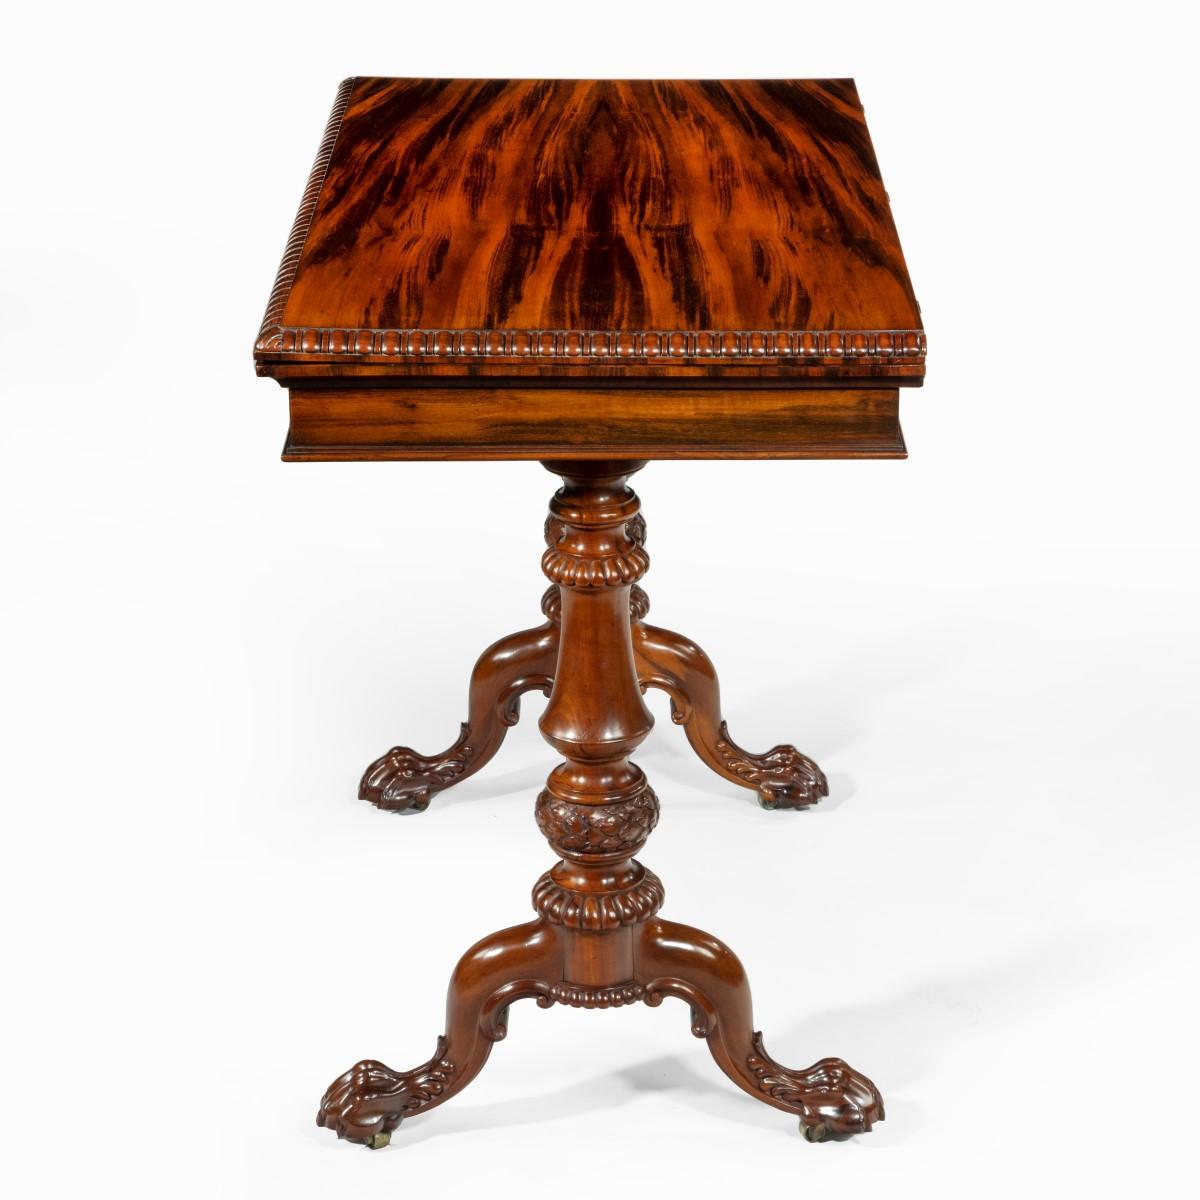 Early Victorian Goncalo Alves Card Table Attributed to Gillows In Good Condition For Sale In Lymington, Hampshire